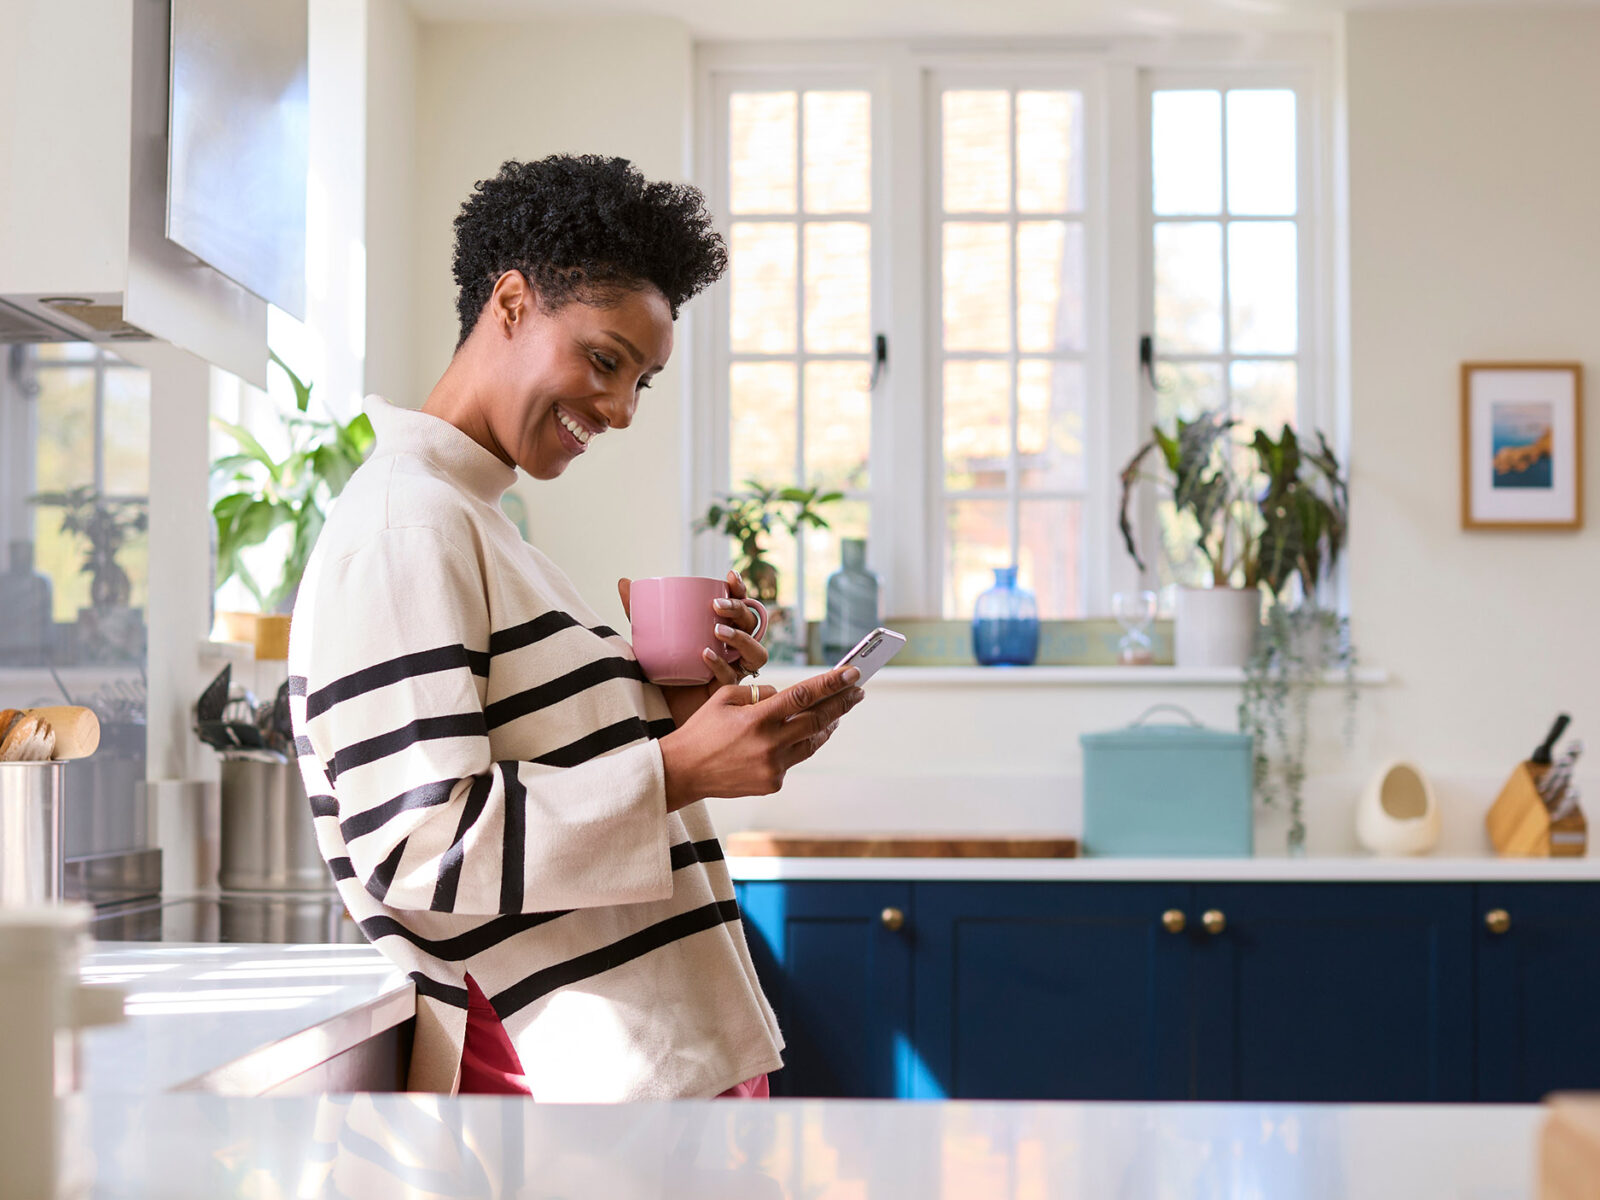 Mature Woman At Home In Kitchen Drinking Coffee And Checking Social Media On Mobile Phone